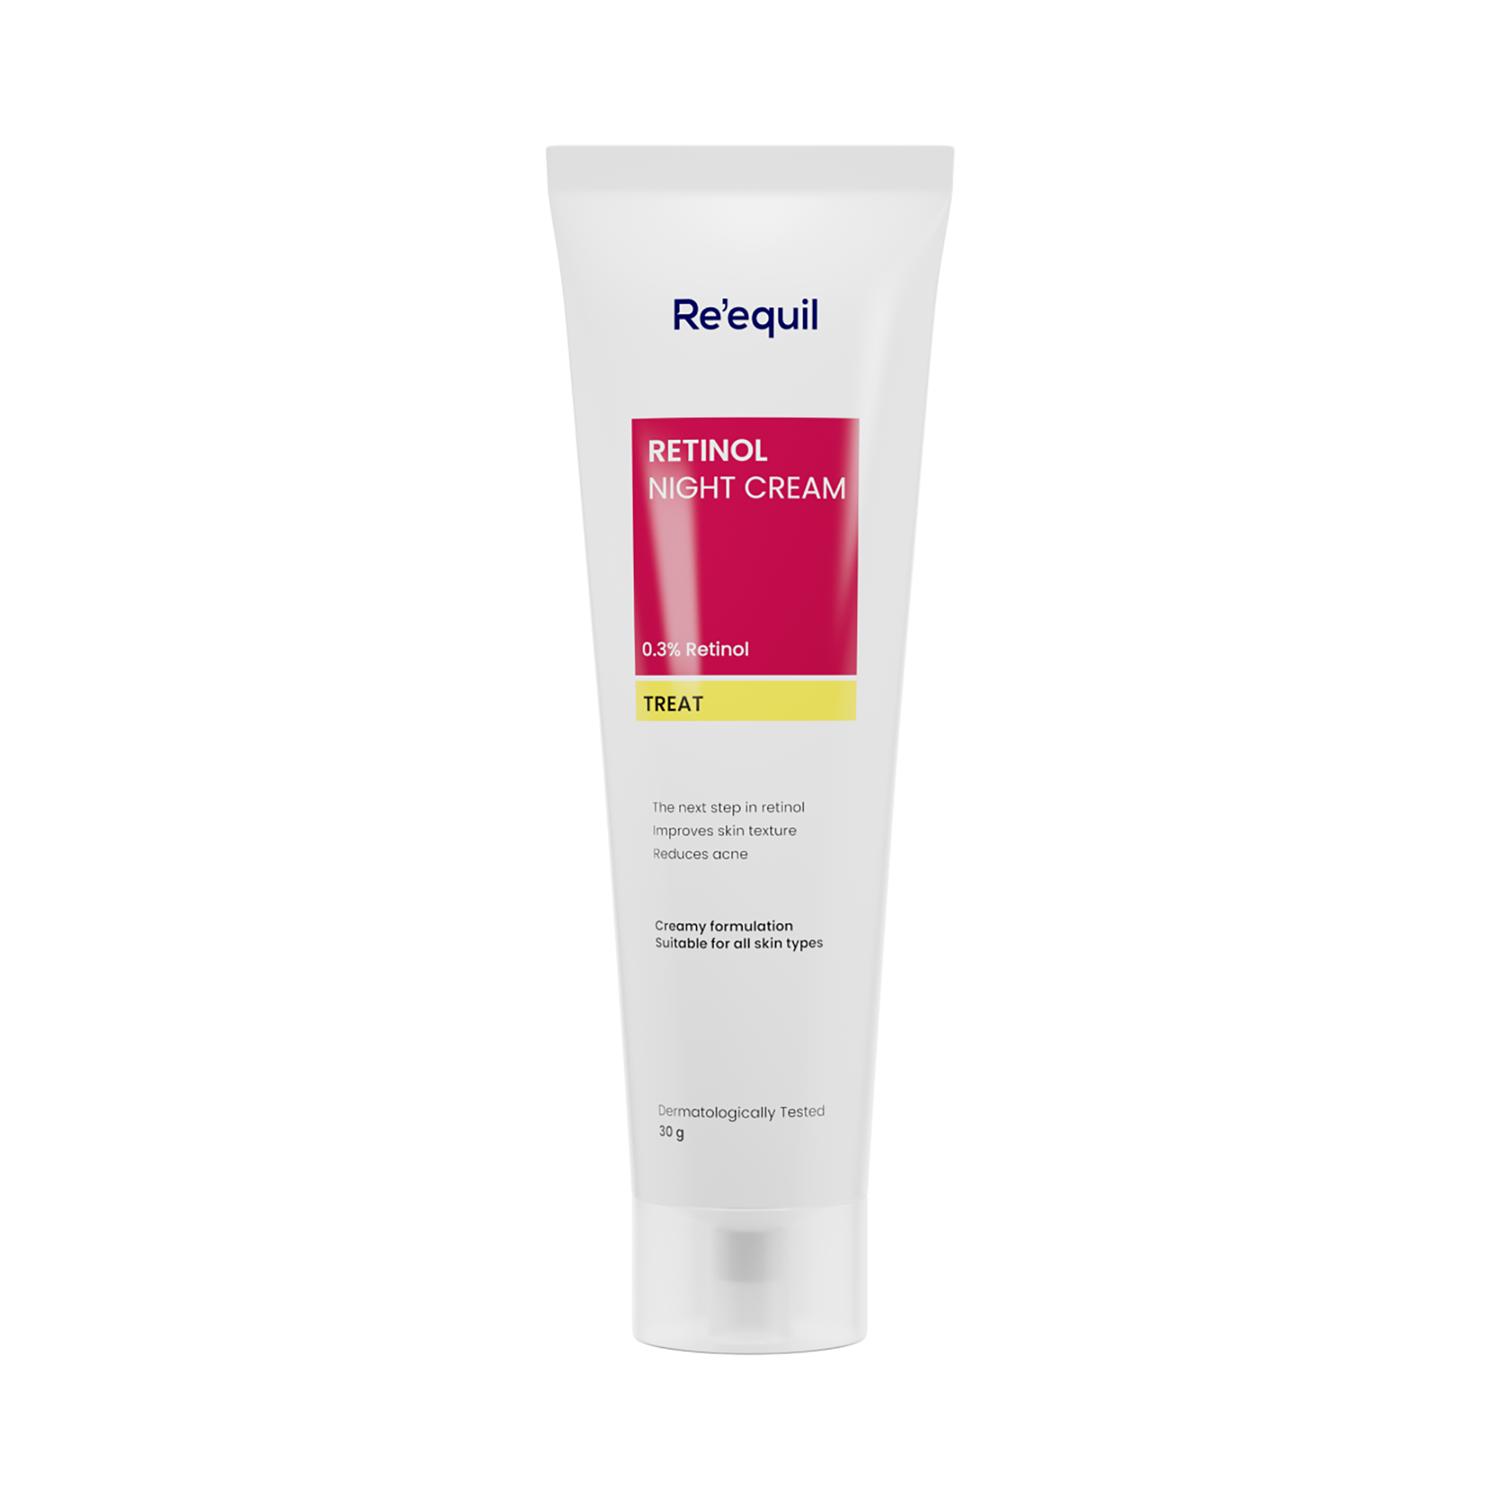 Re'equil | Re'equil 0.3% Retinol Night Cream (30 g)